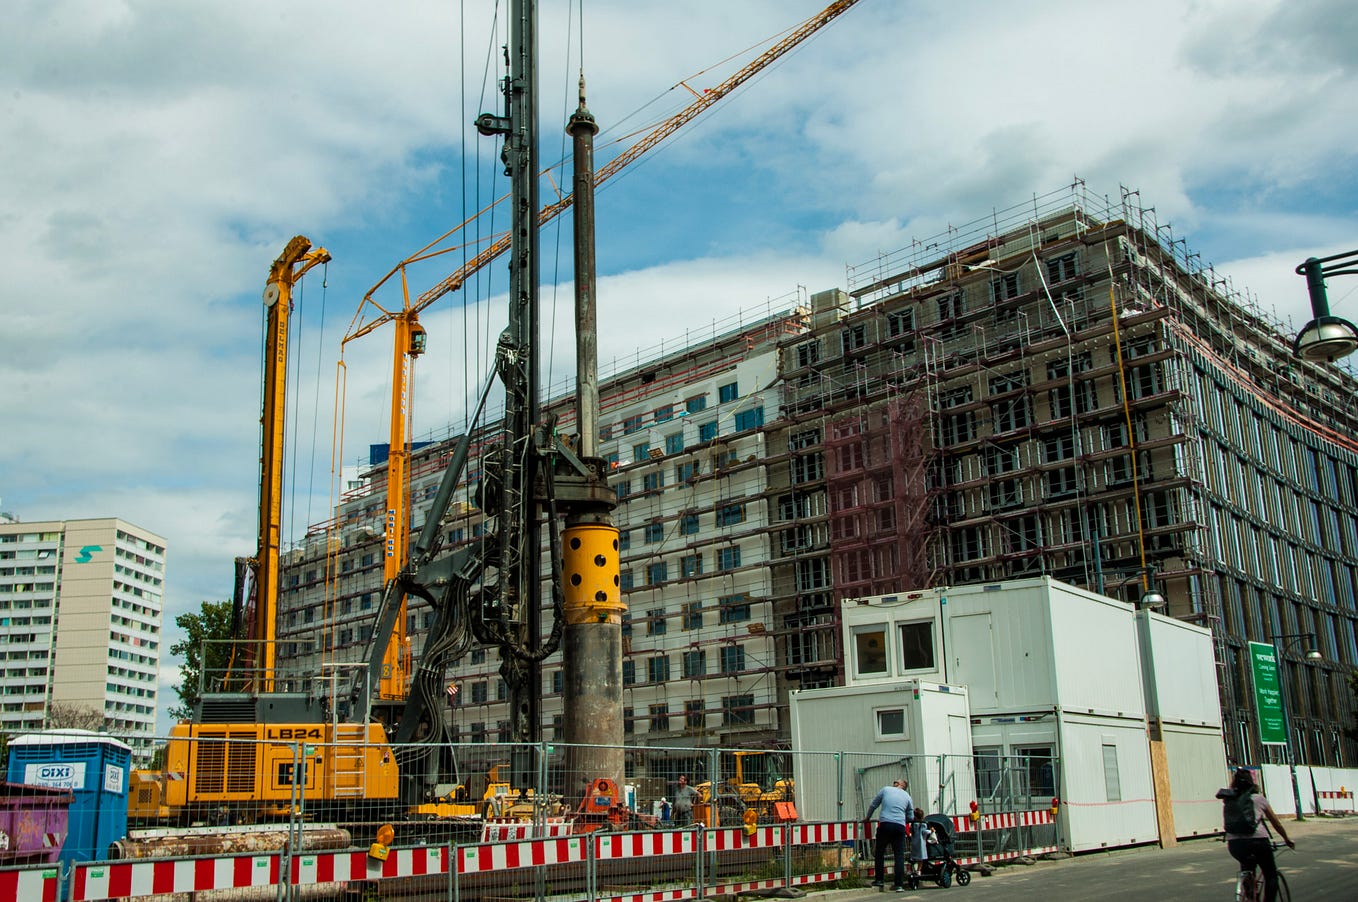 Berlin: A City Plagued by Gentrification